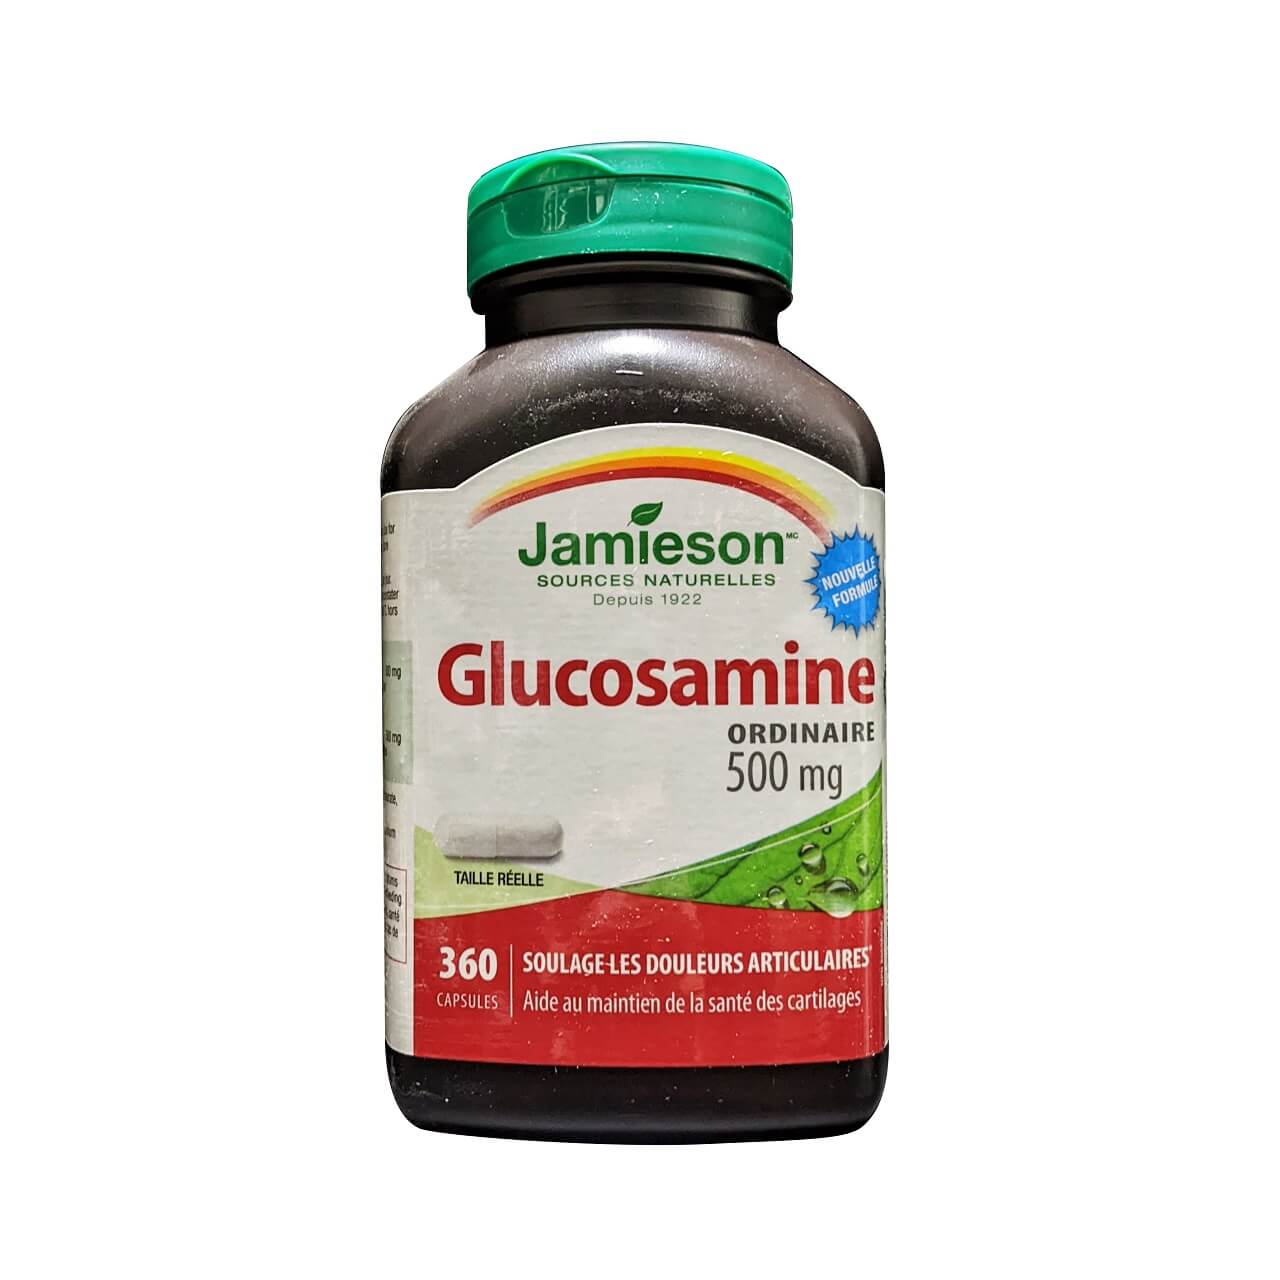 Product label for Jamieson Glucosamine 500 mg Regular Strength (360 capsules) in French